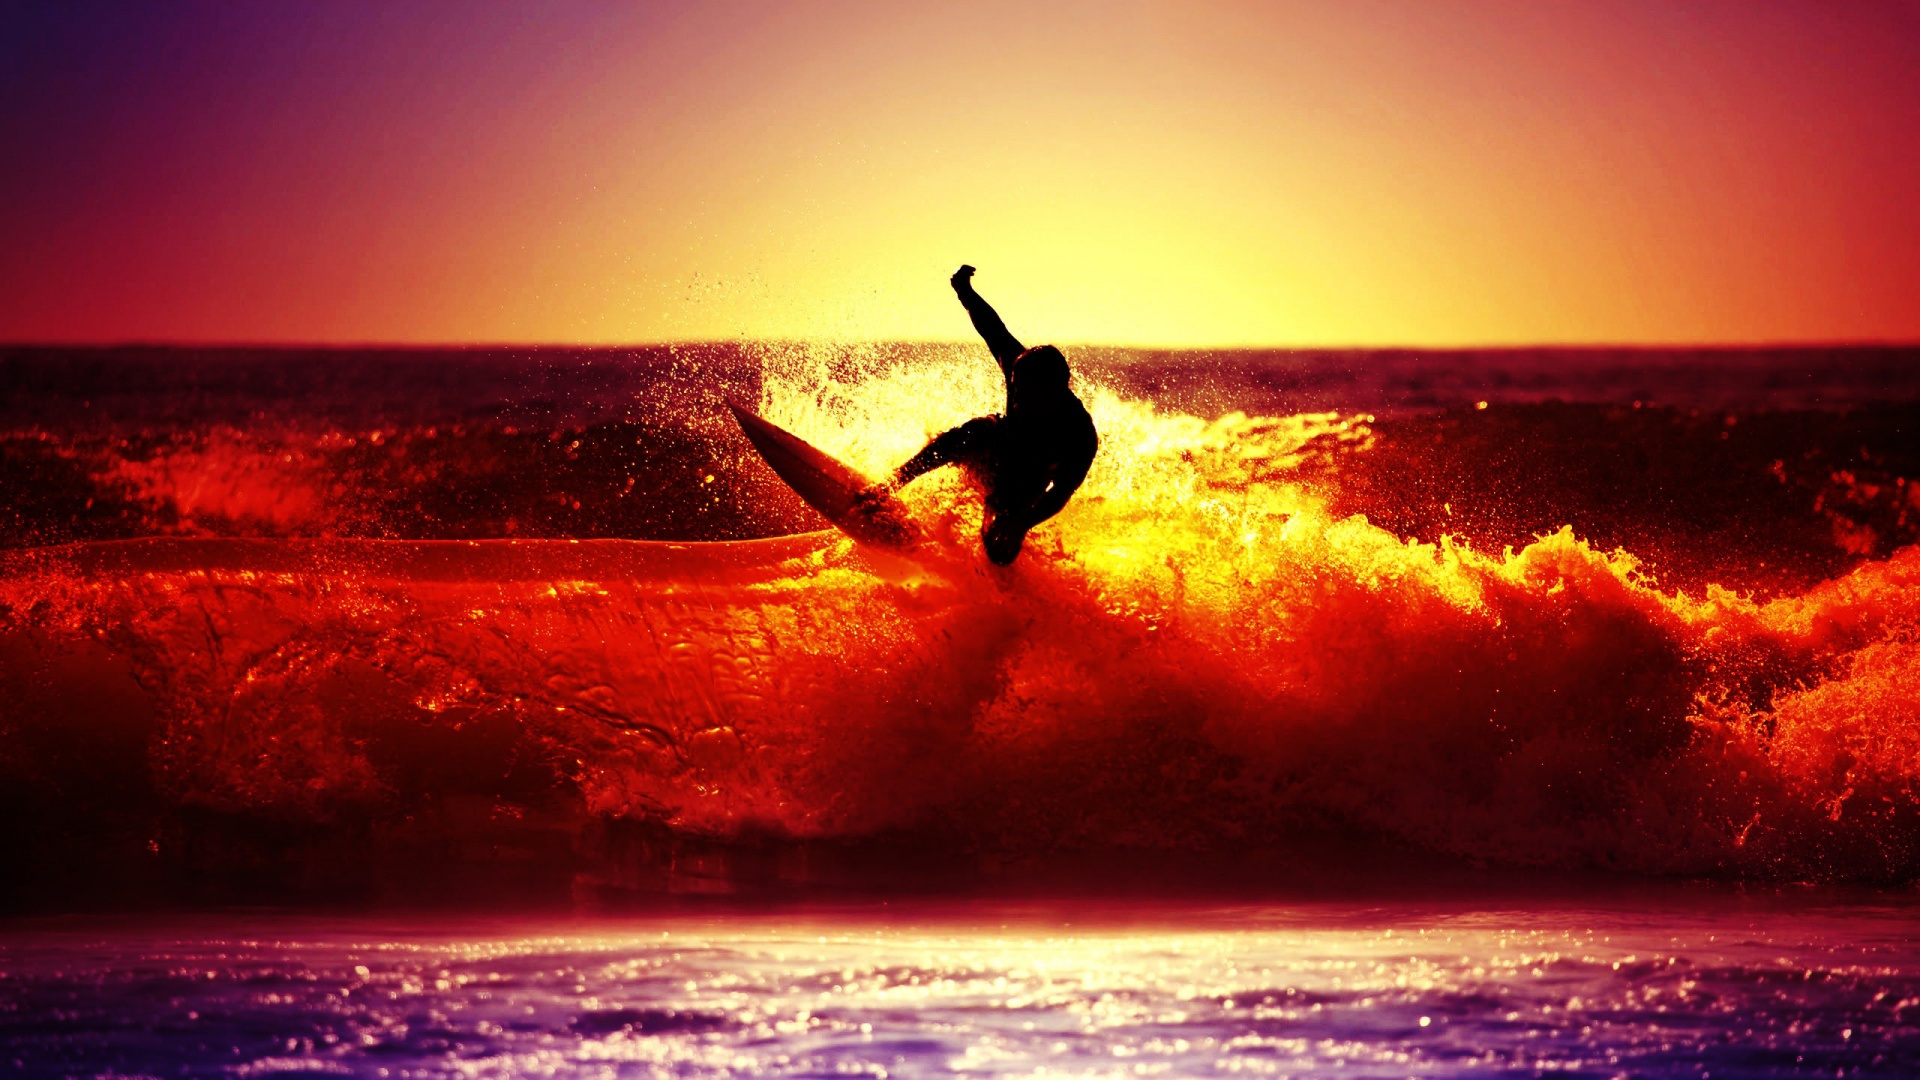 Surfing Pictures